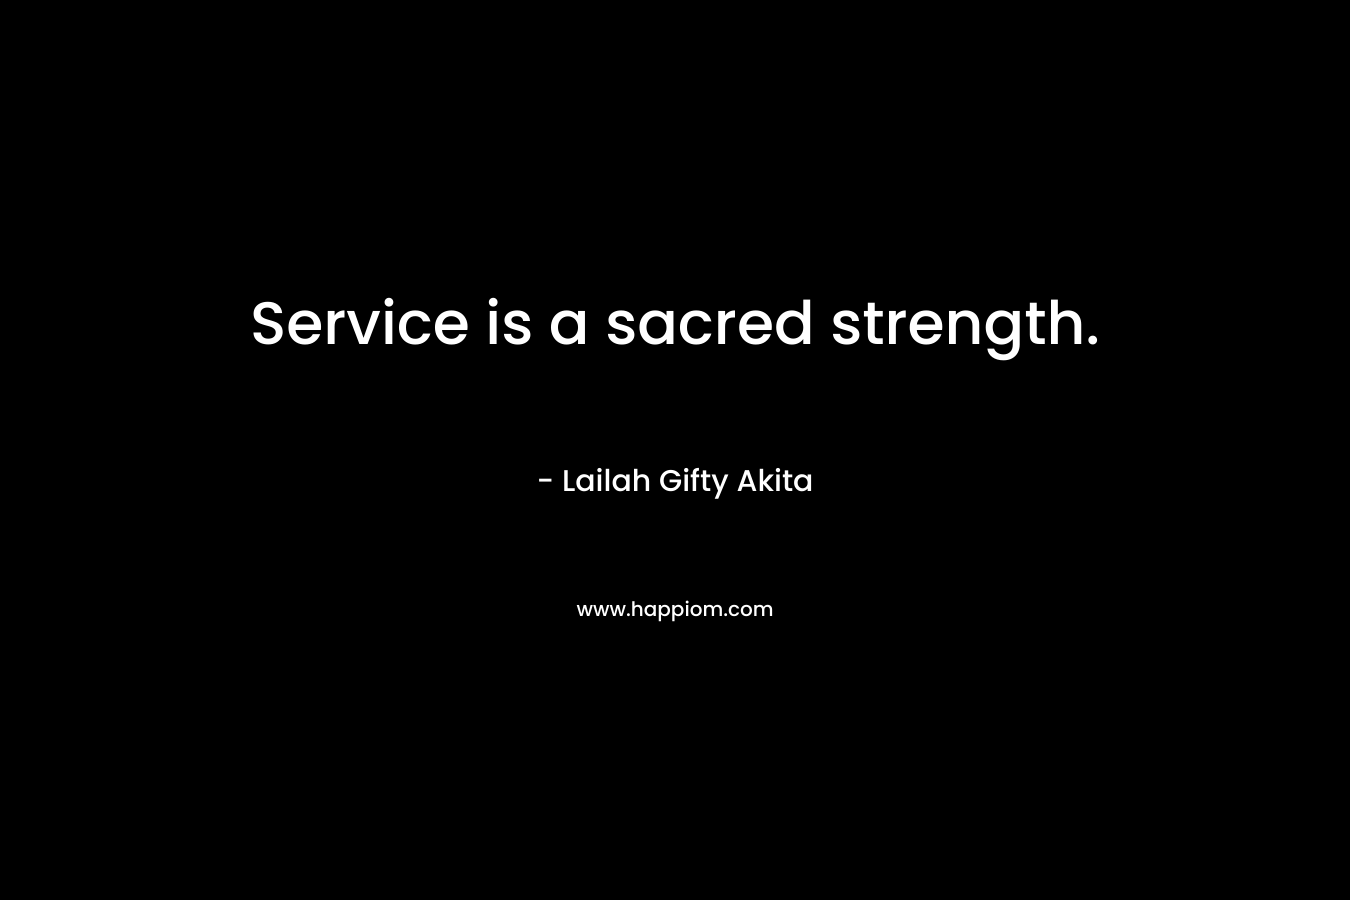 Service is a sacred strength.